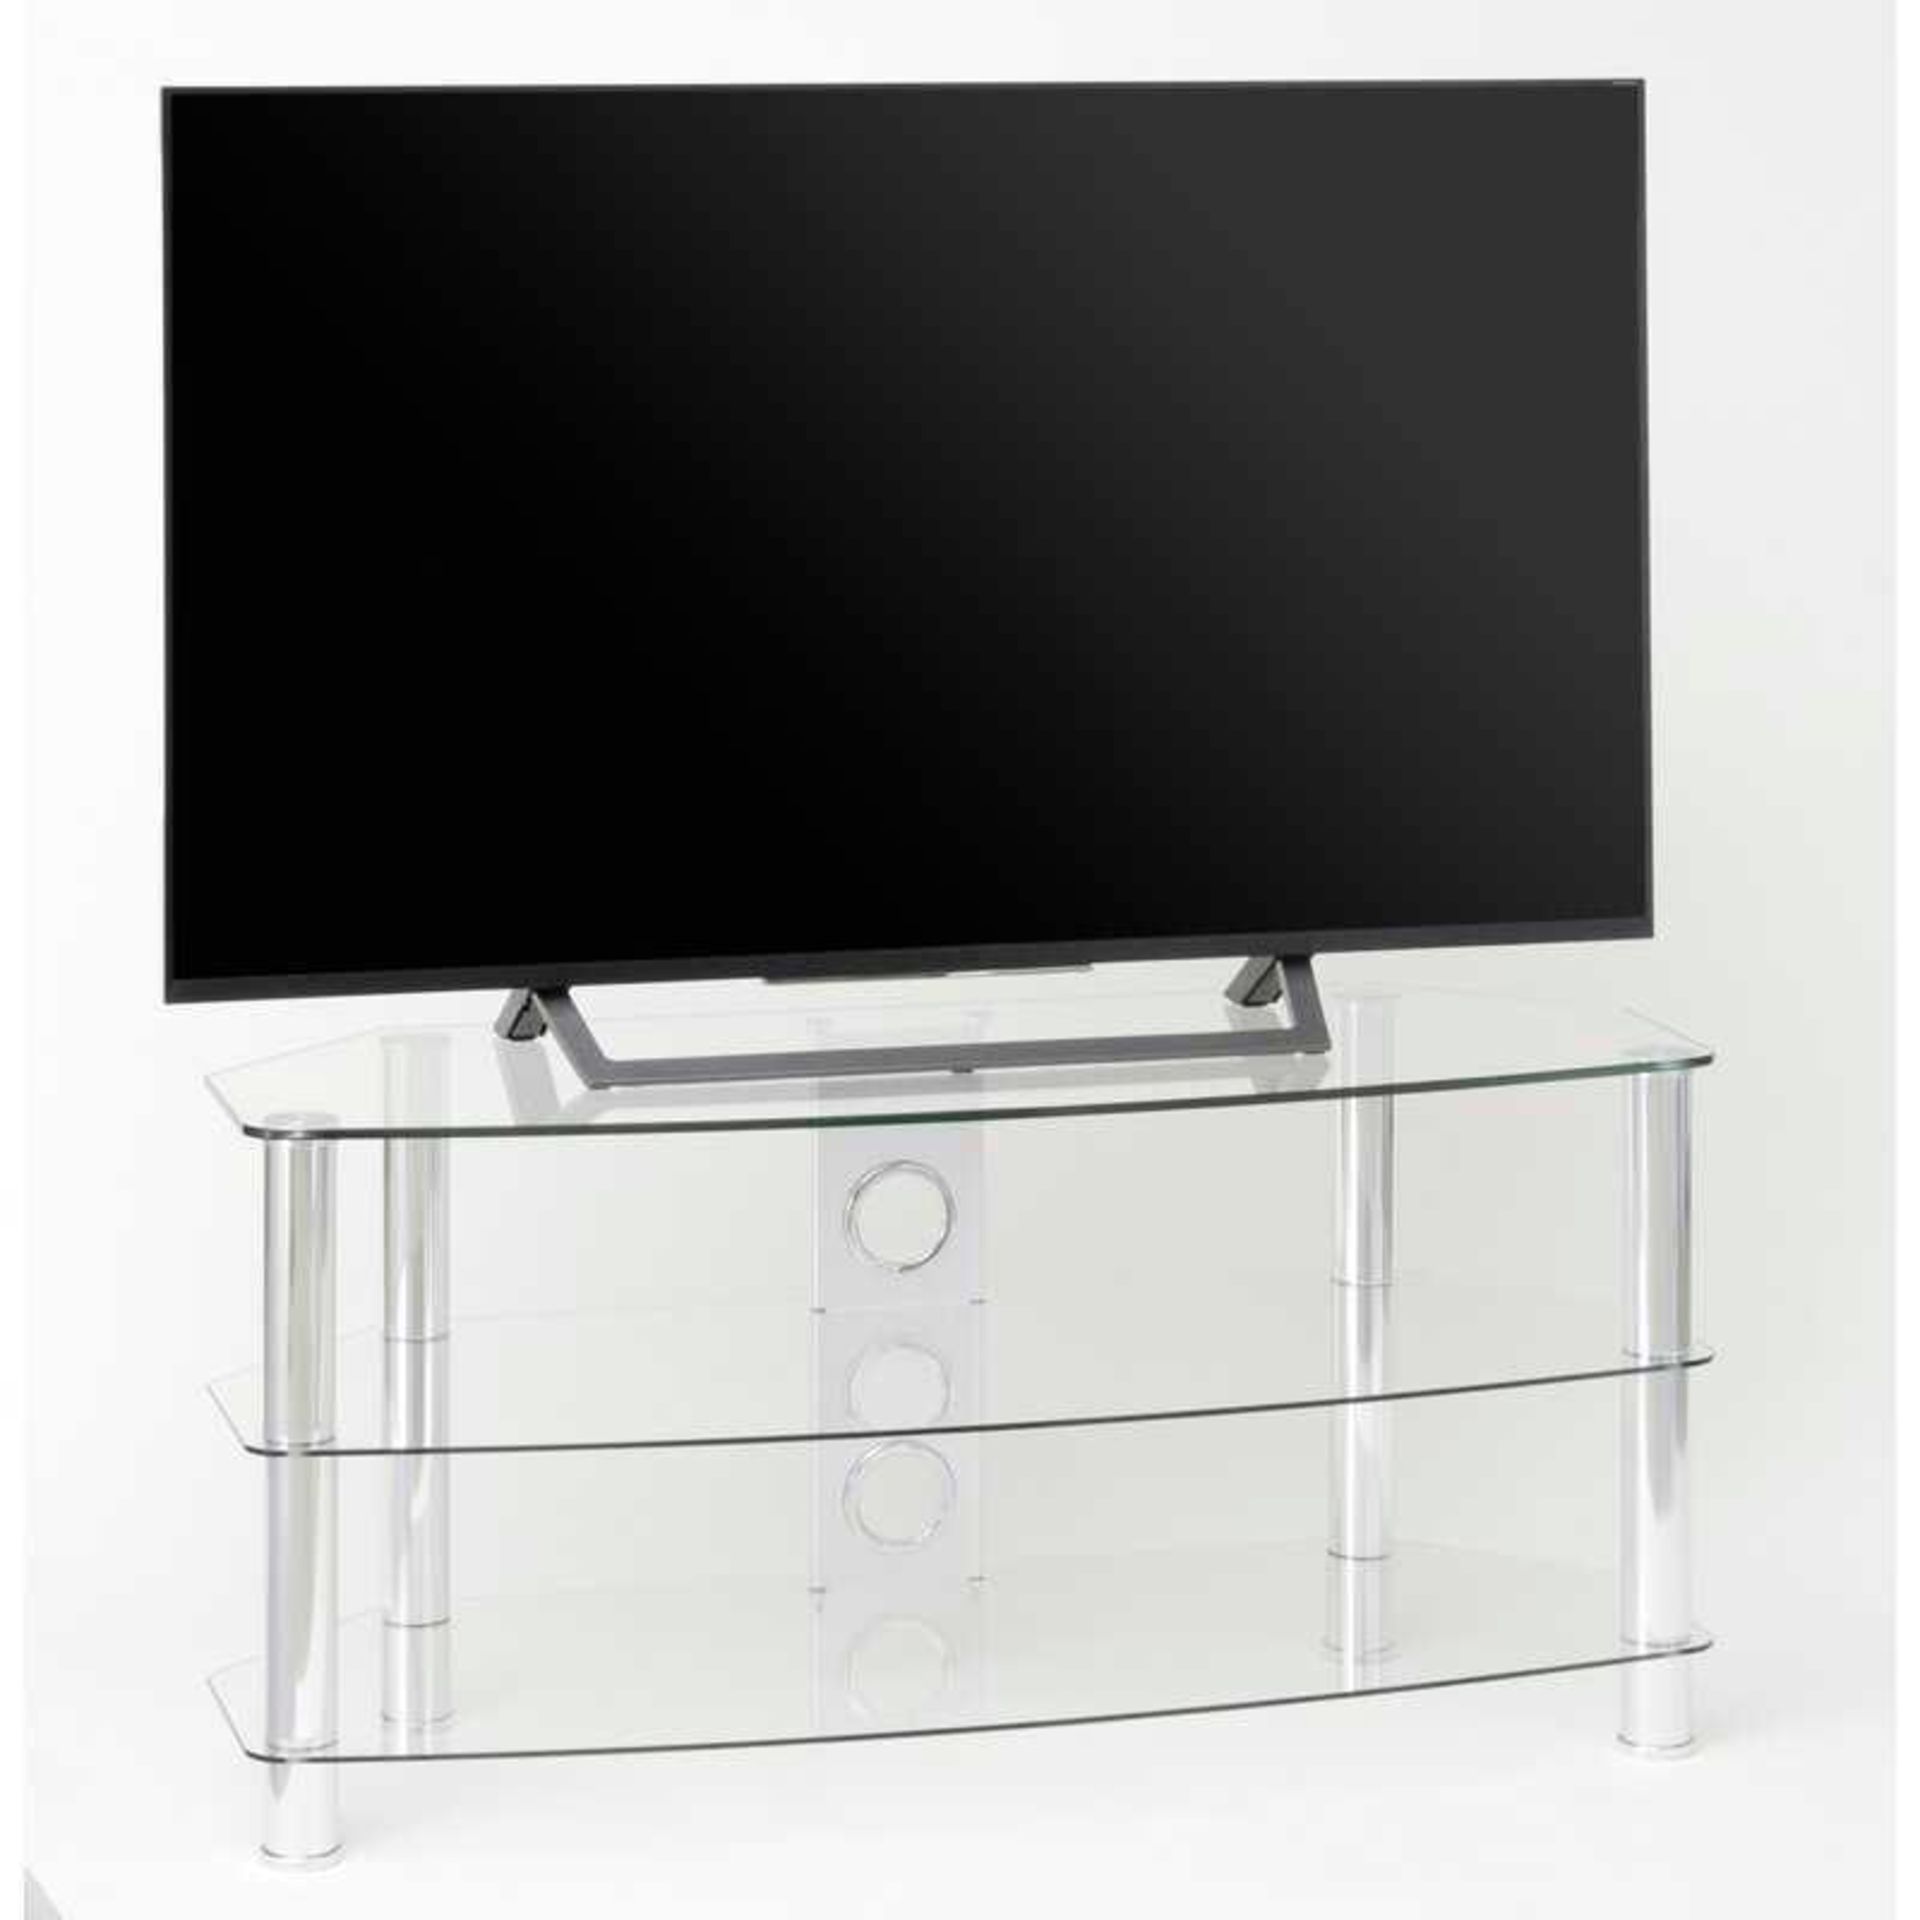 Rrp £100 Clear Glass Tv Stand 55"